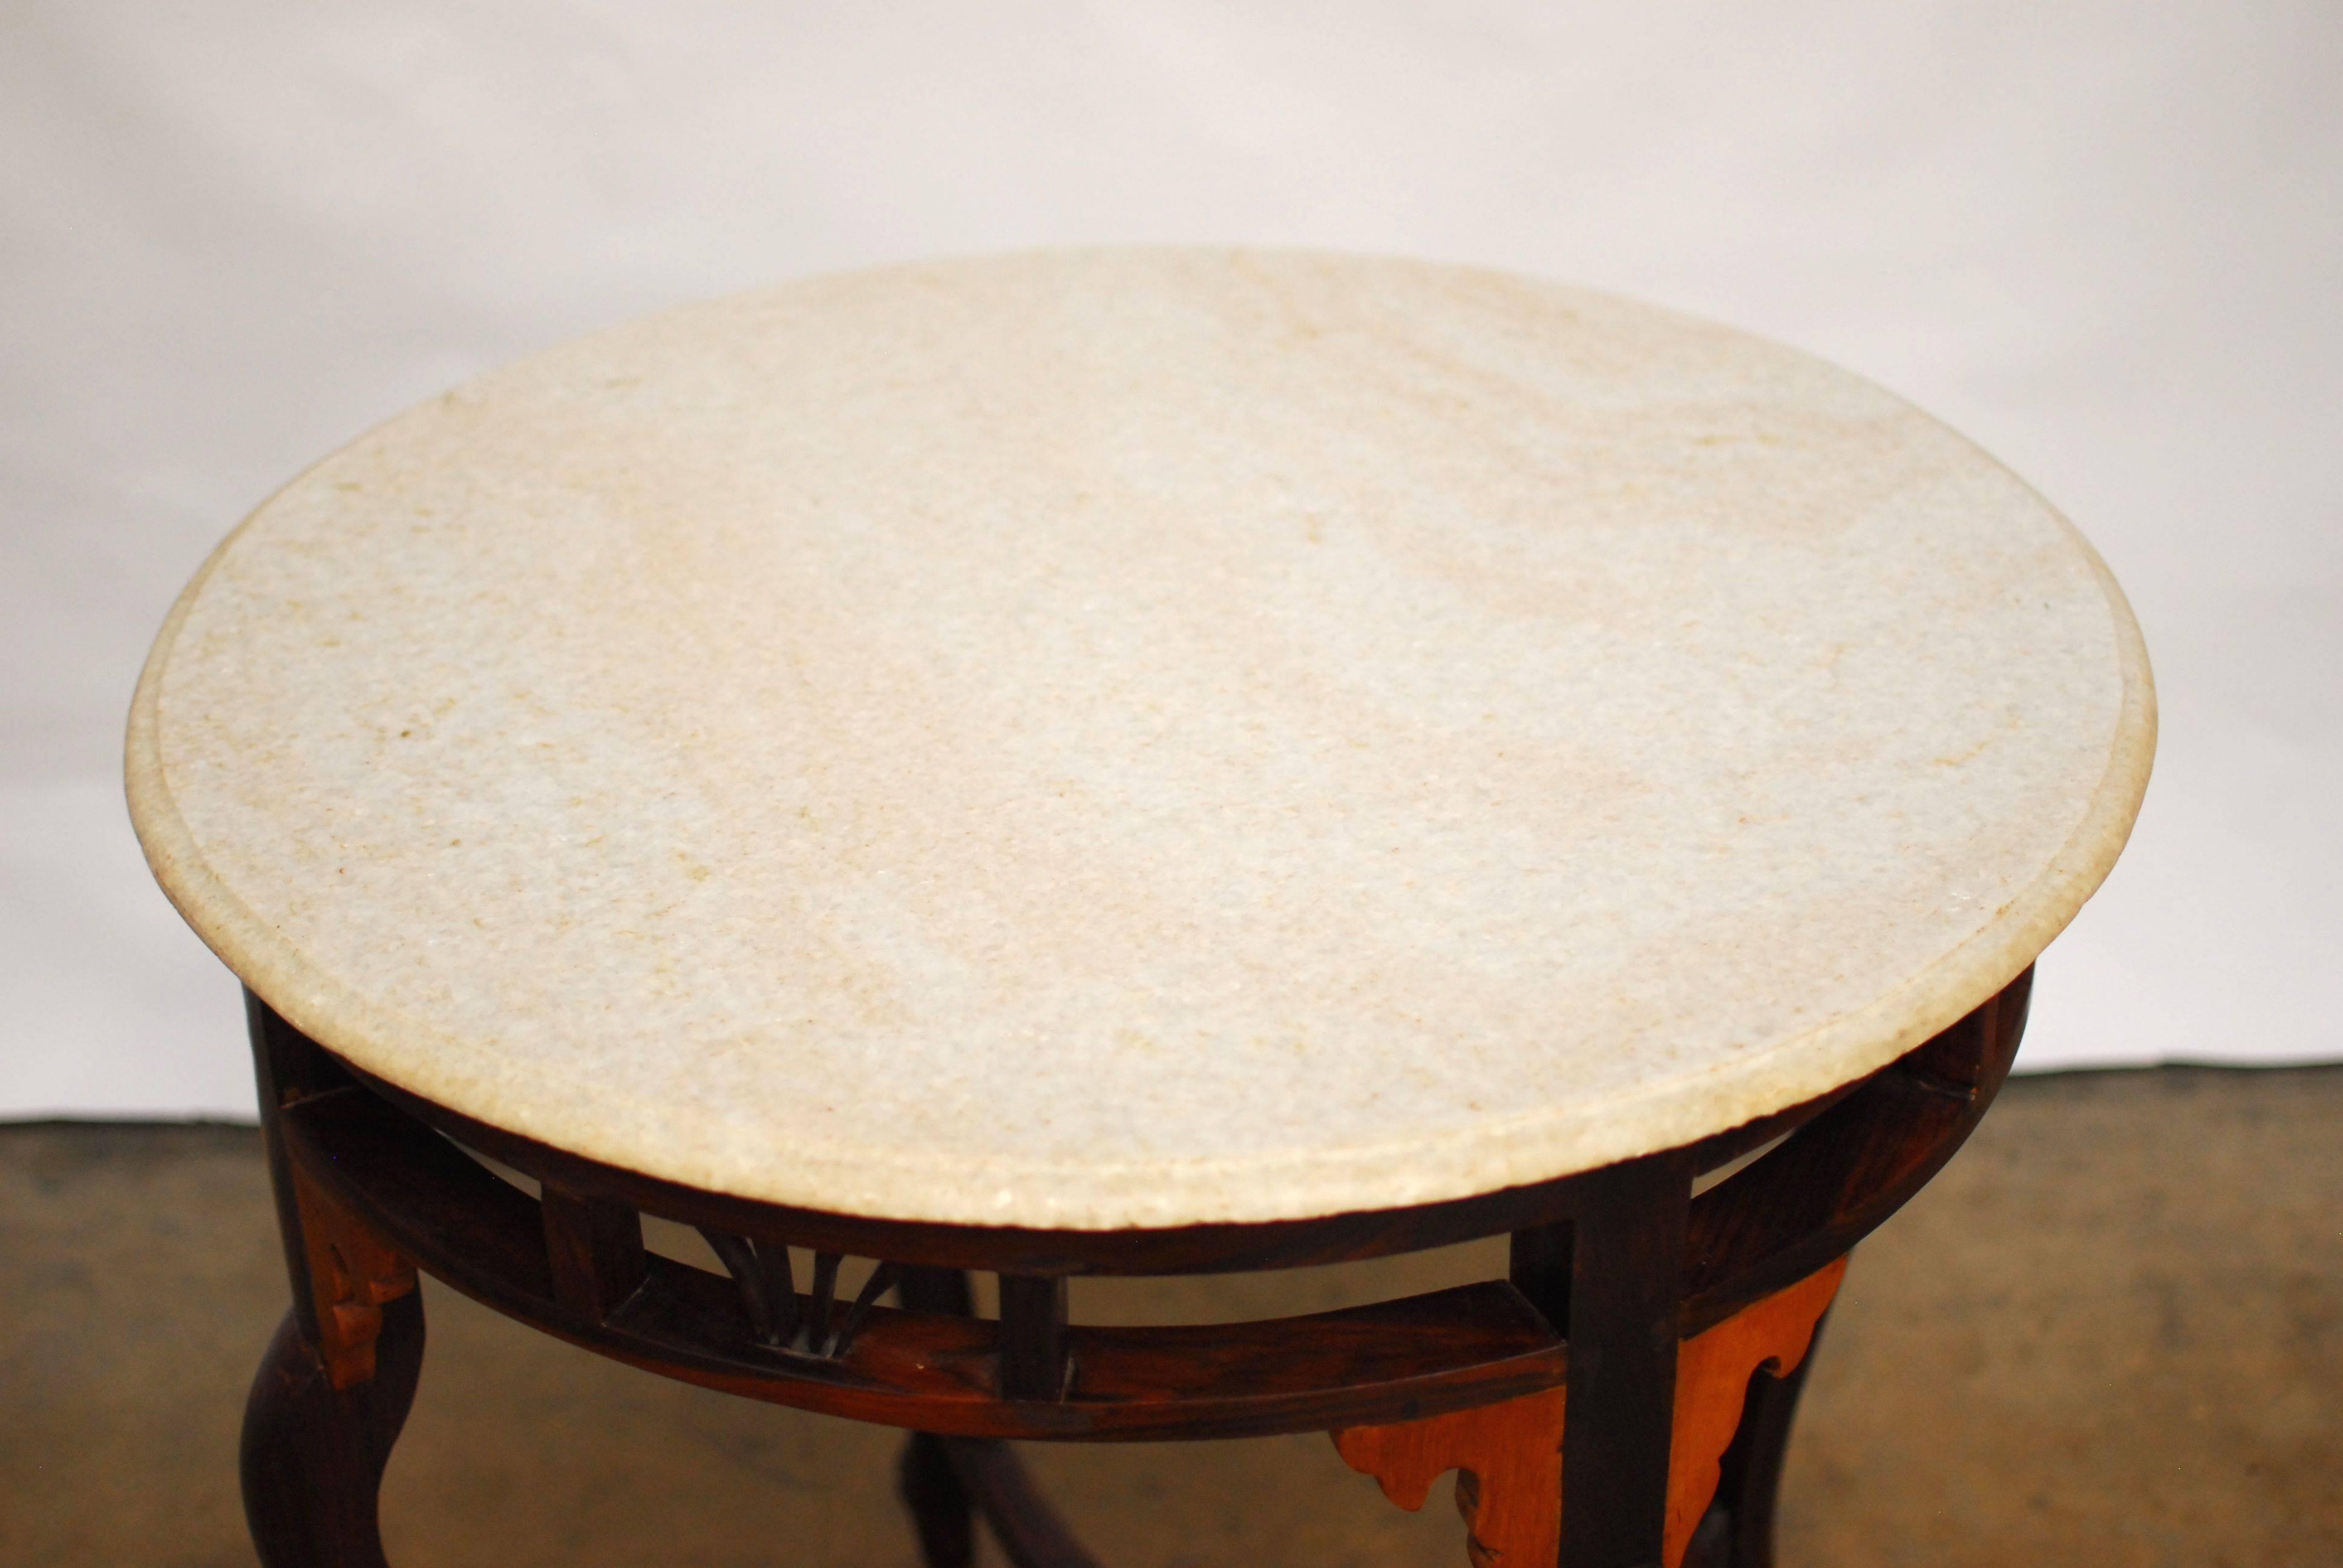 Indian Art Nouveau Style Marble Top Round Table